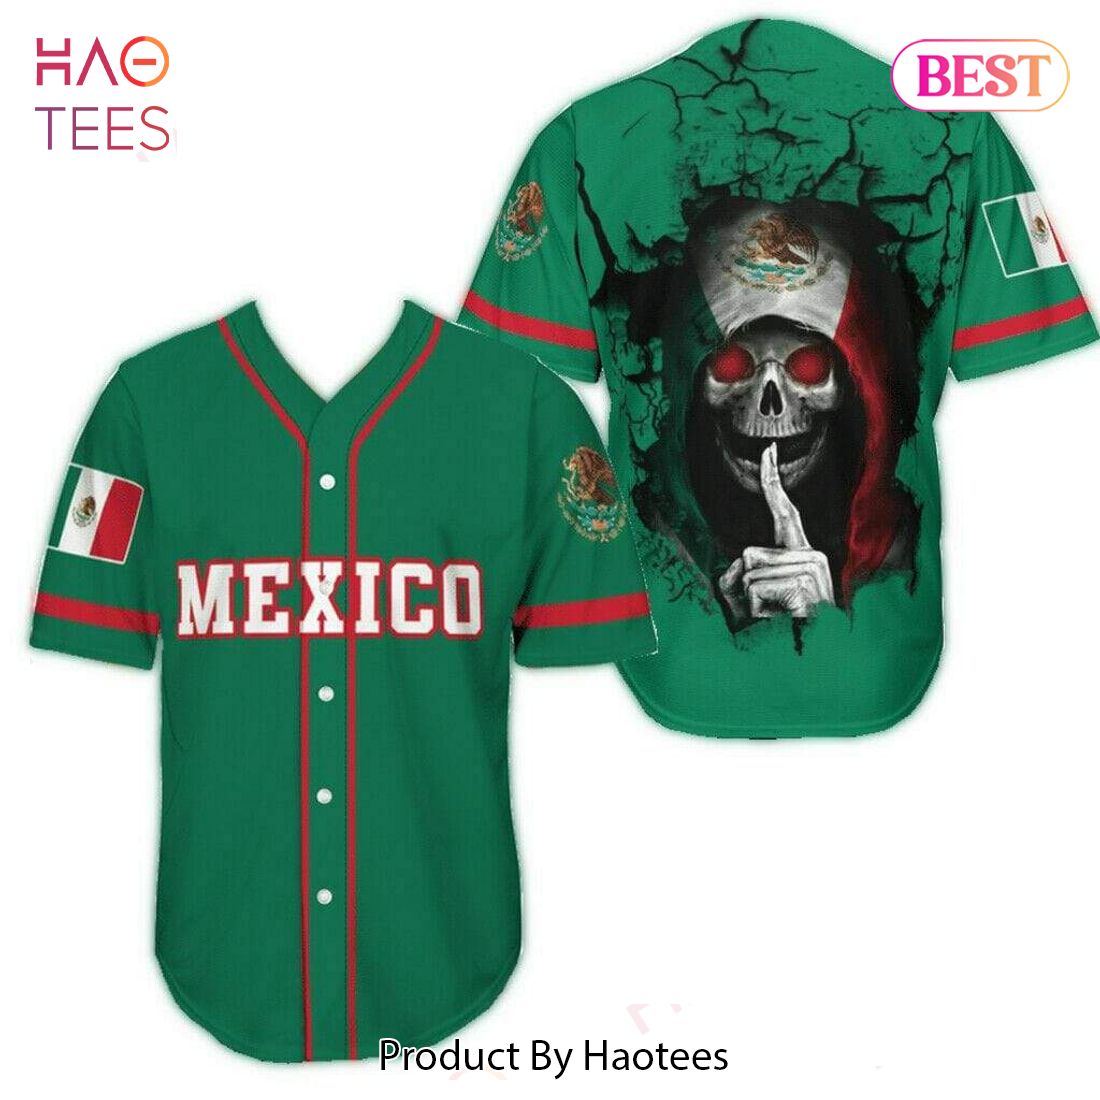 Mexico Aztec Mexican Custom Name Baseball Jersey s 5xl For Men Dad Gift